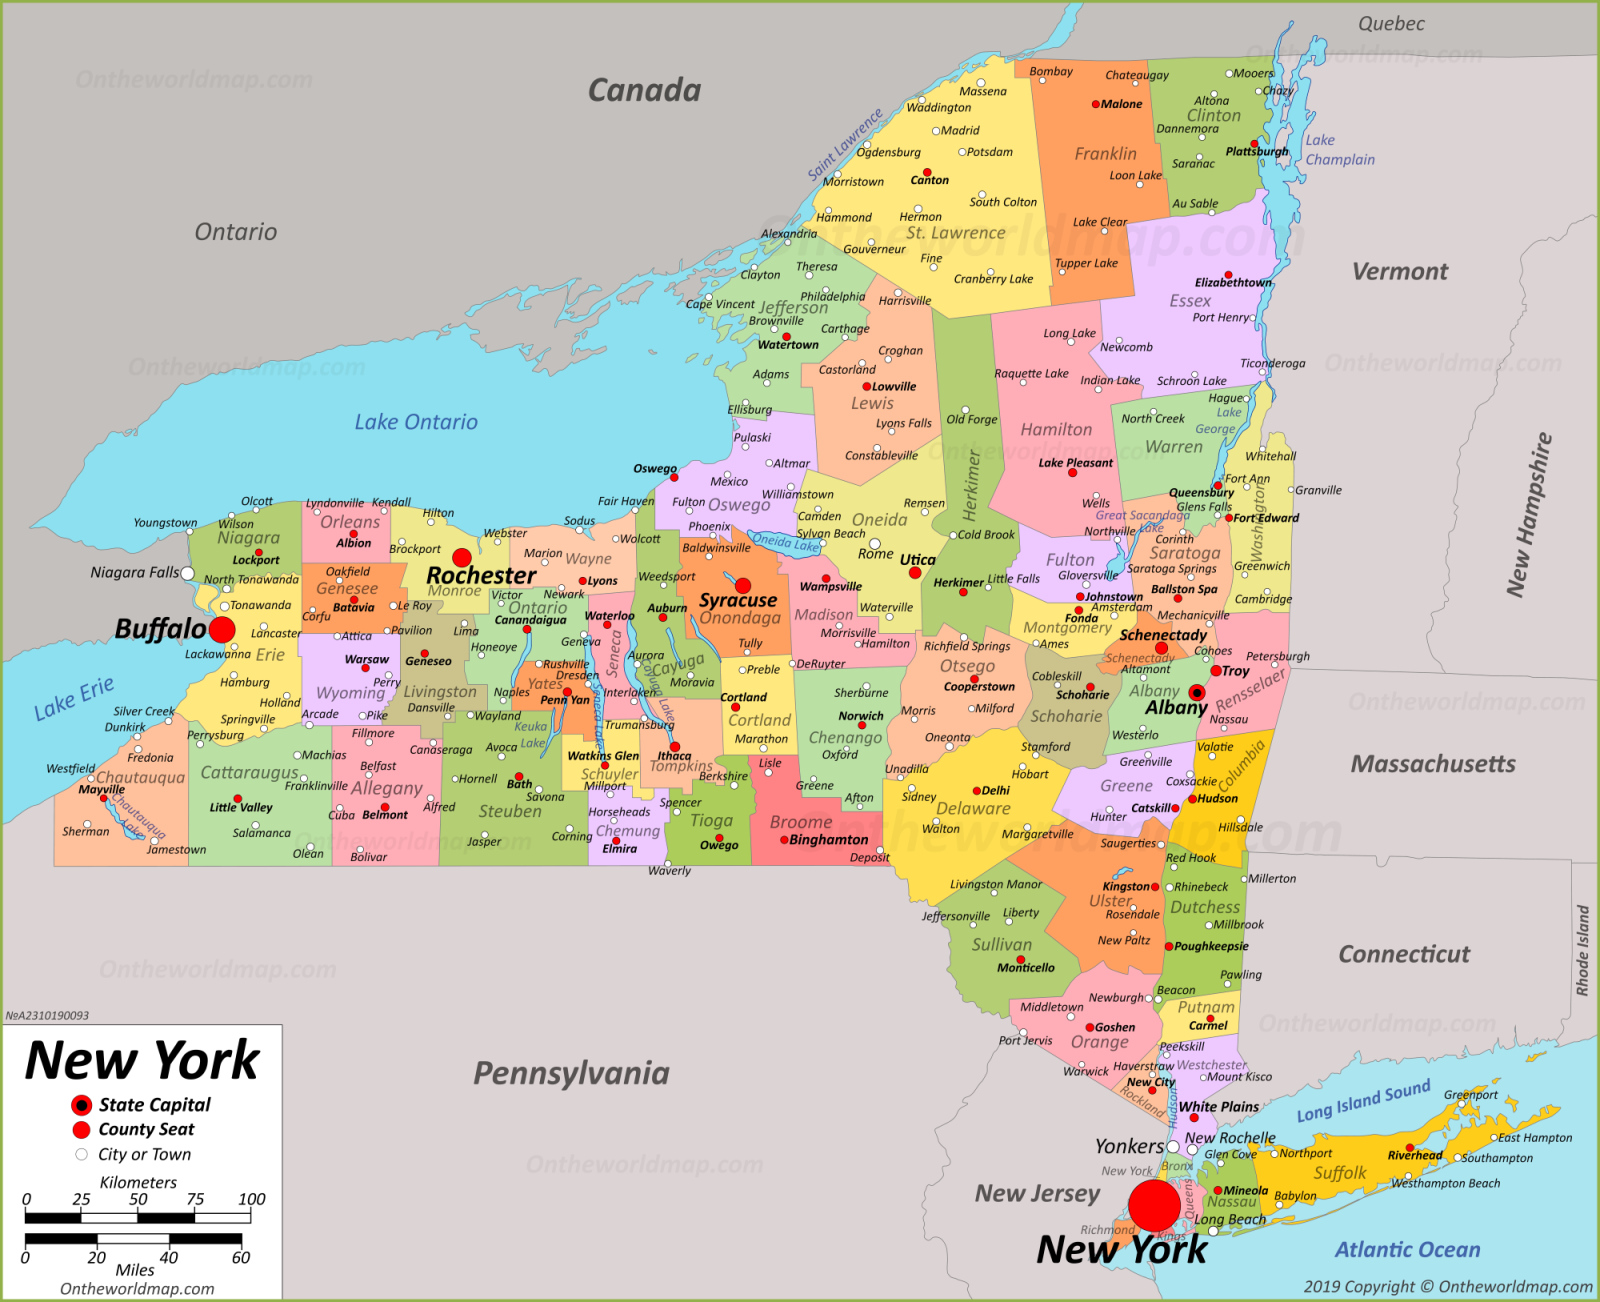 drab-map-of-new-york-city-towns-free-vector-www